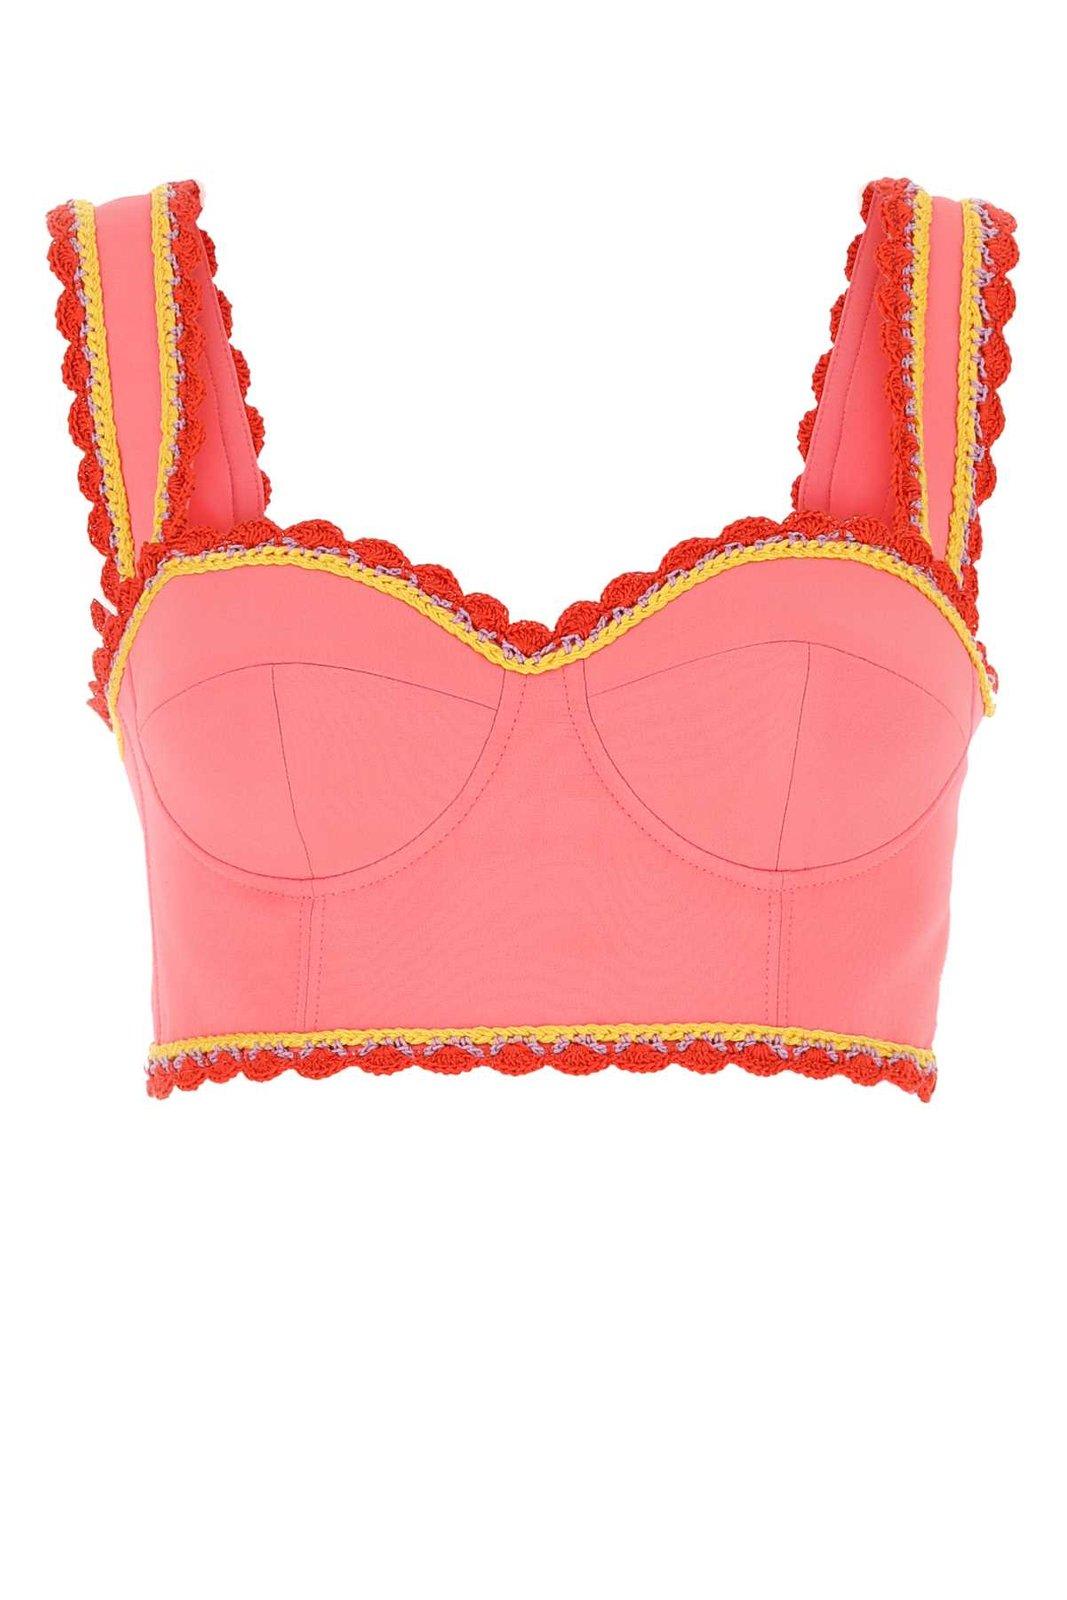 MOSCHINO CROCHET-TRIM BUSTIER CROPPED TOP